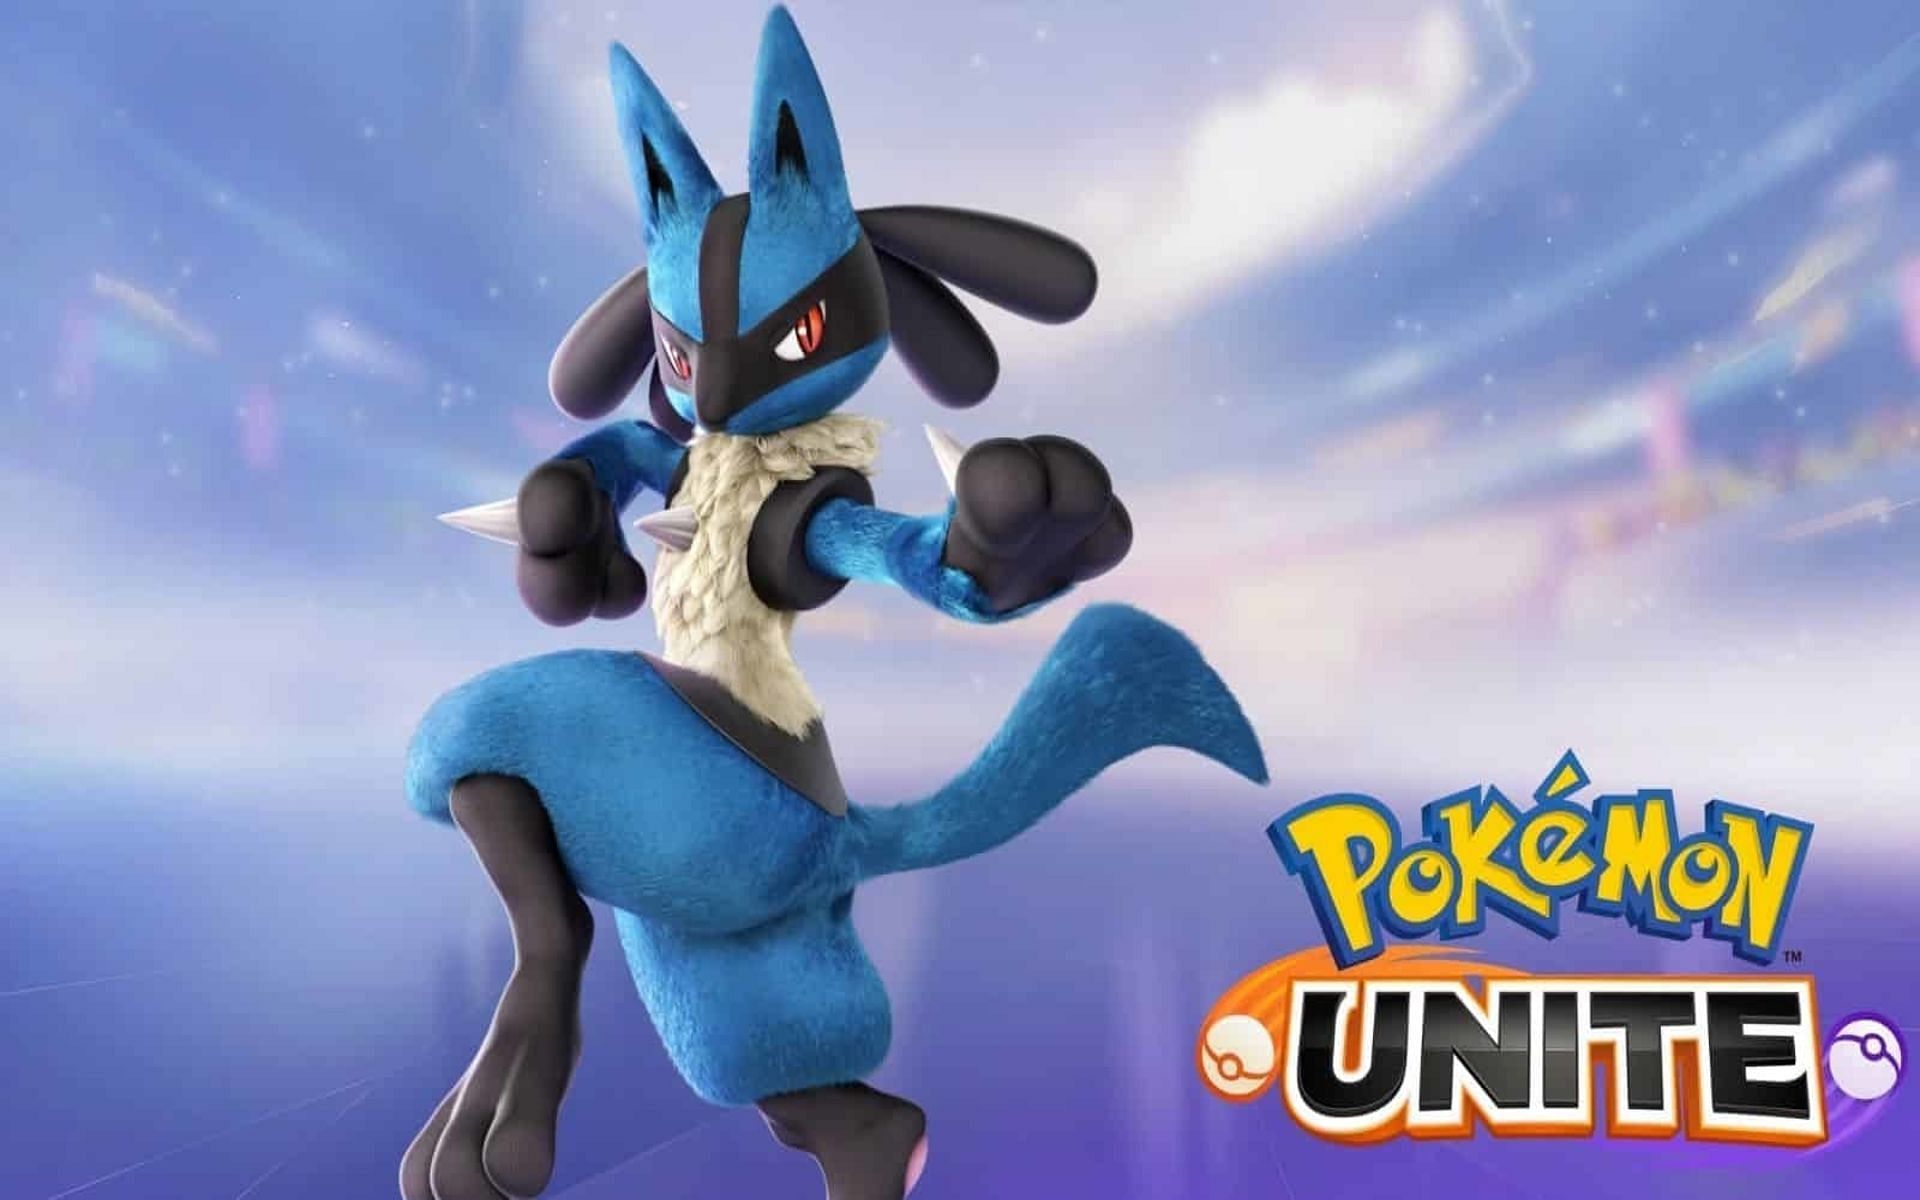 Lucario has made appearances in Pokemon Unite and Super Smash Bros as well as the main series games (Image via TiMi Studios)